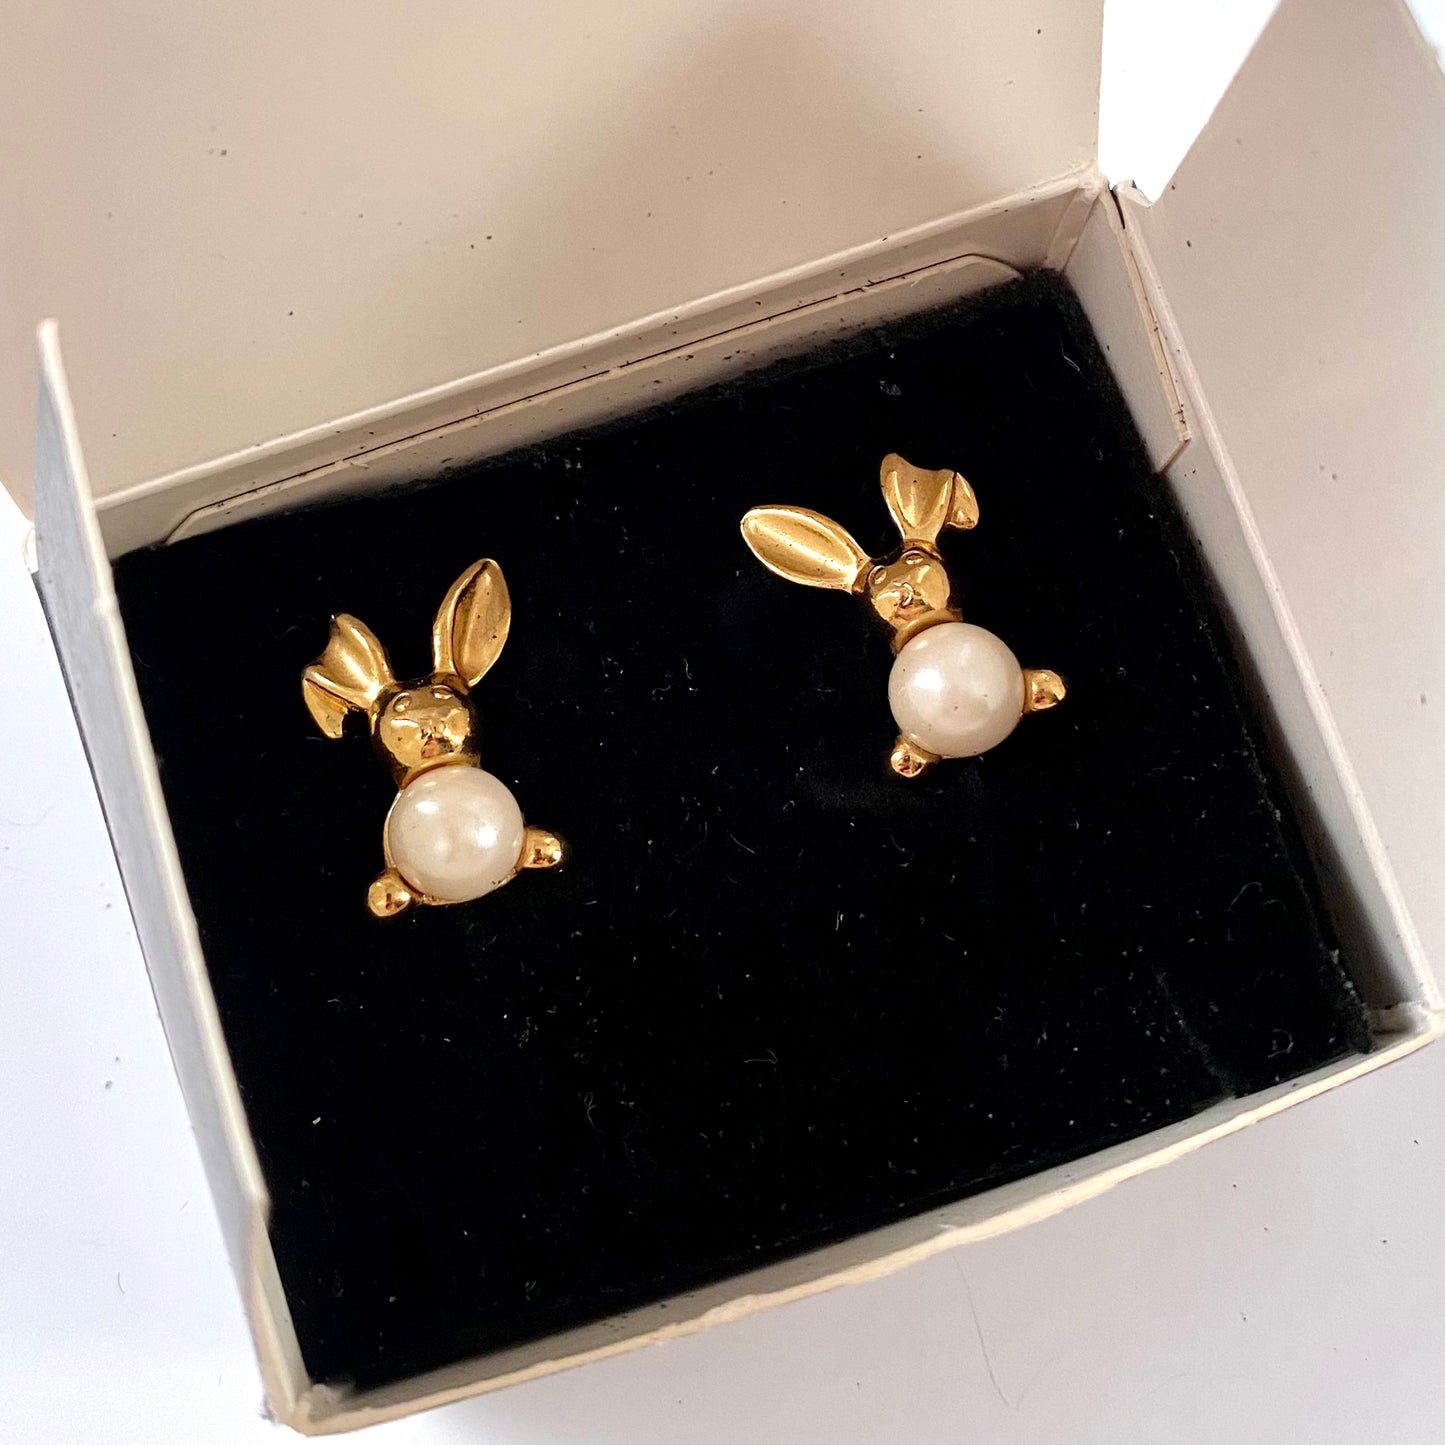 1995 Avon Pearly Bunny Earrings With Original Box